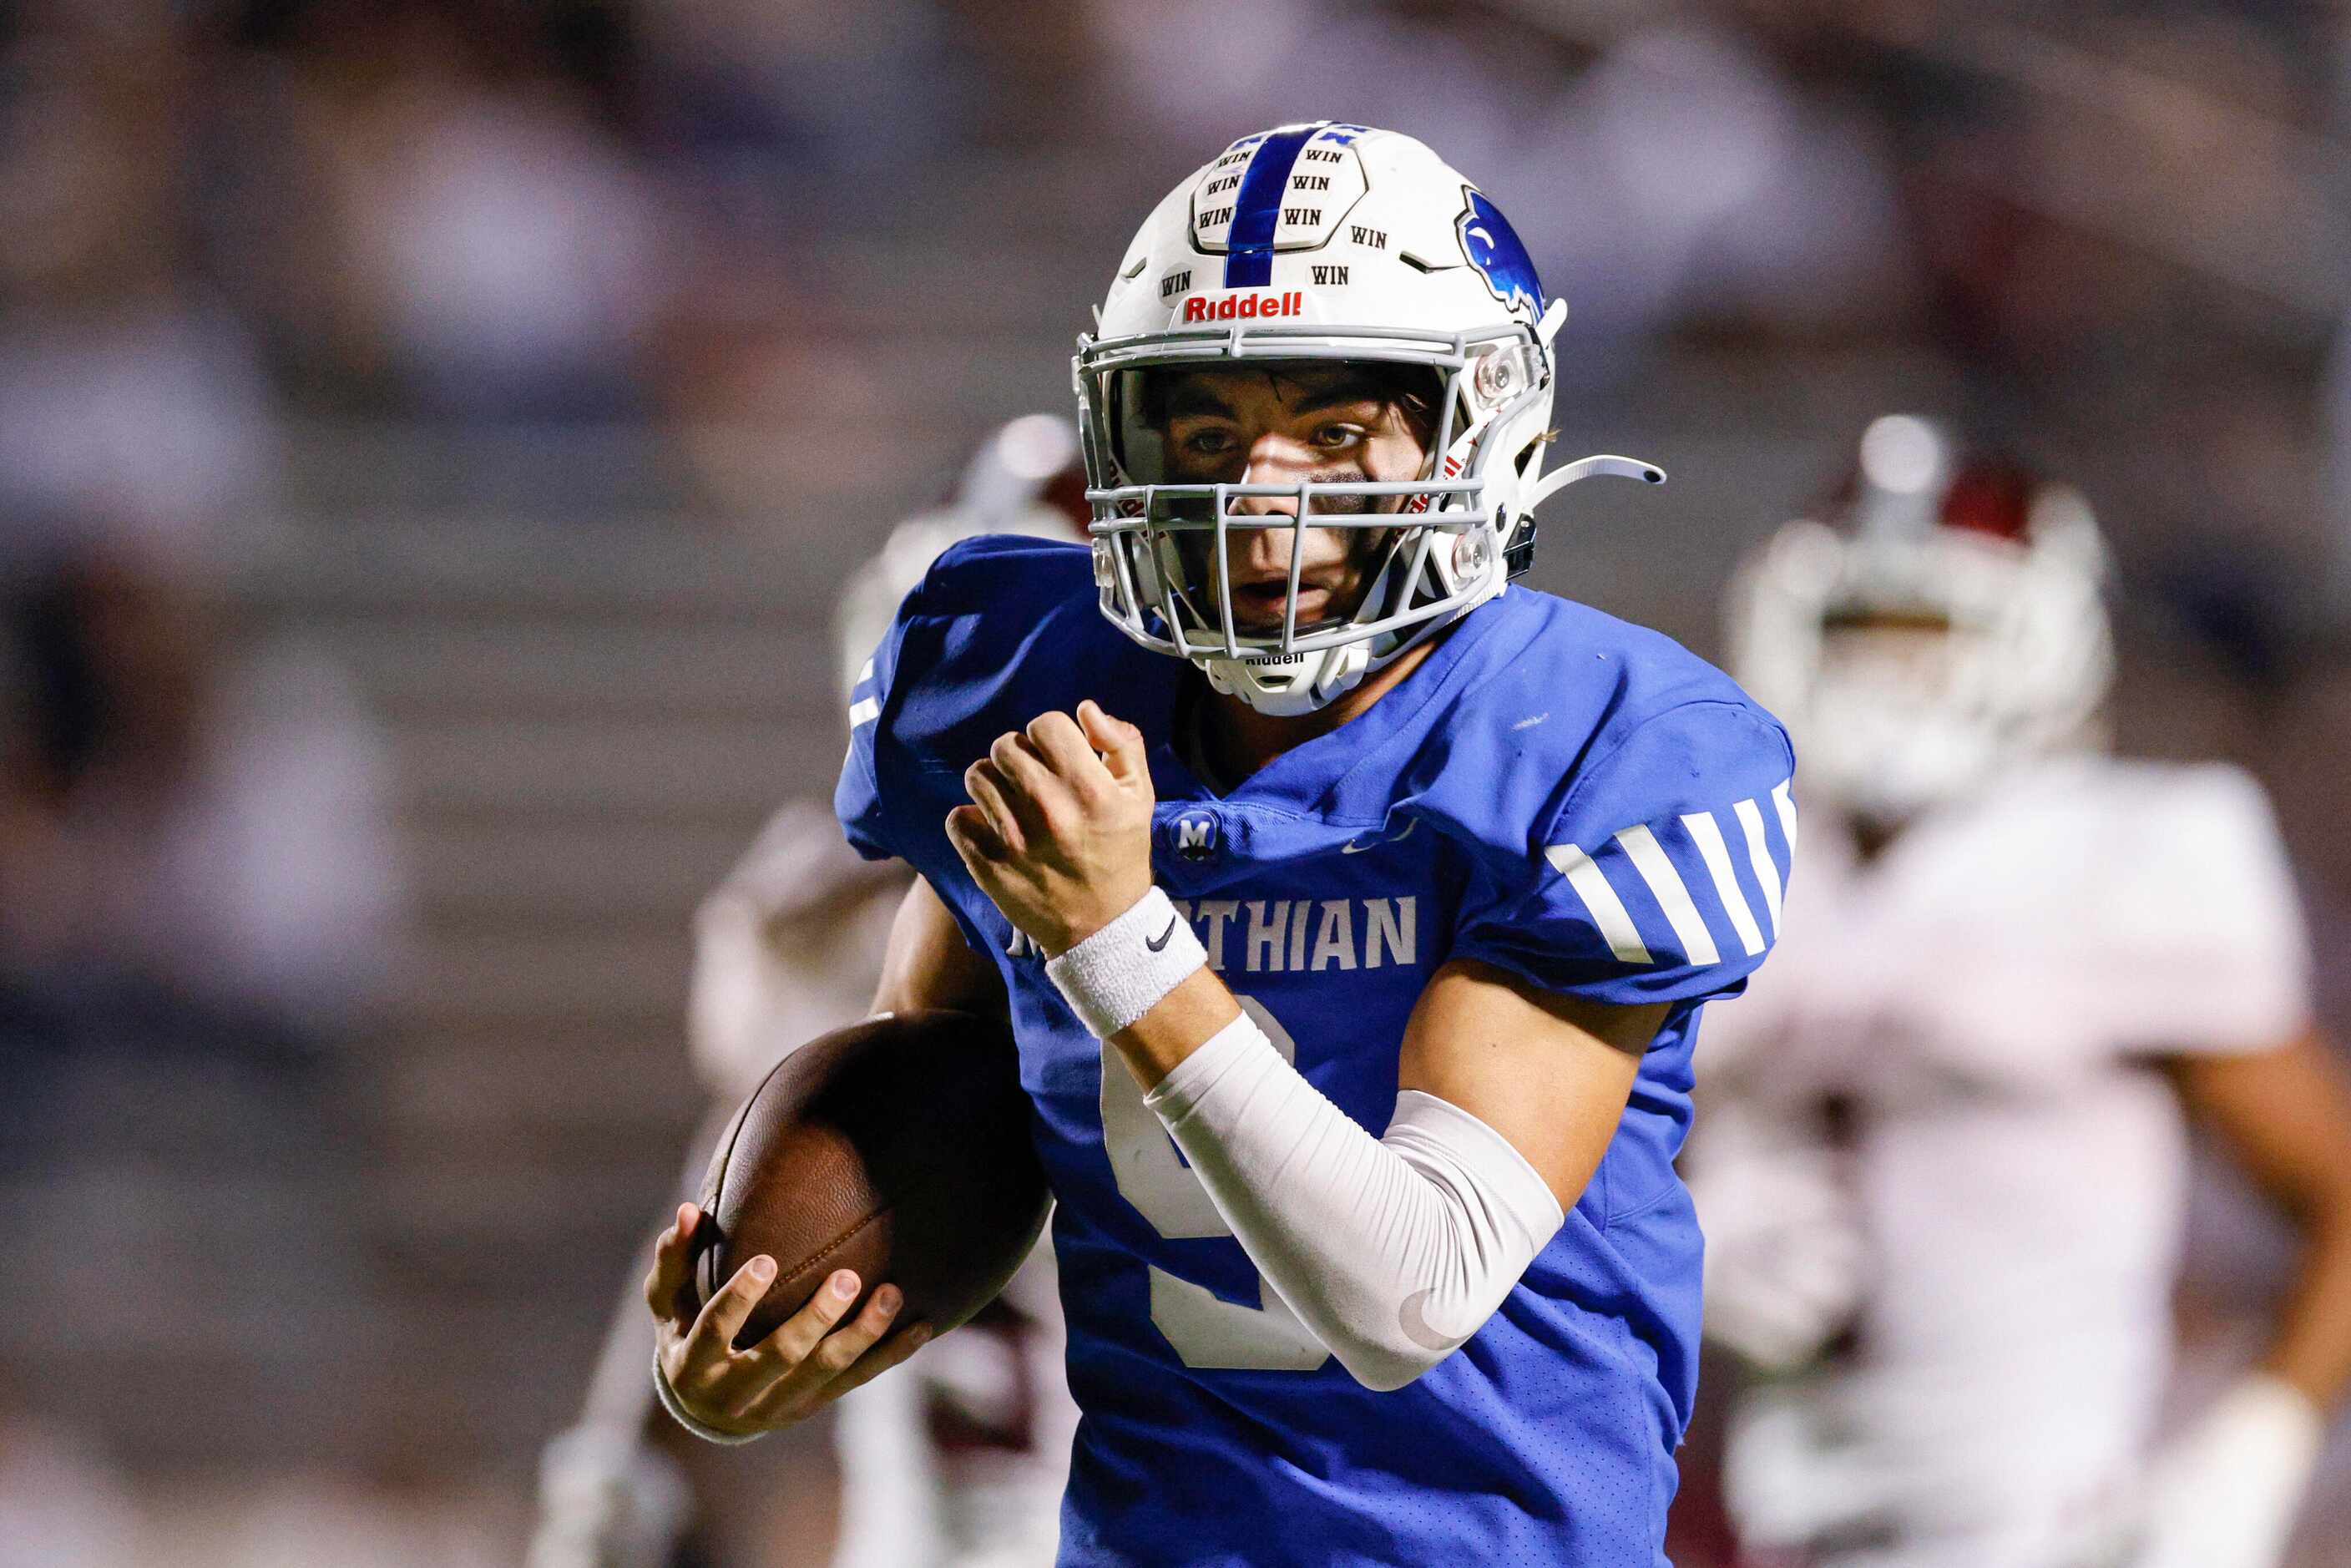 Midlothian quarterback Chad Ragle (9) runs for a touchdown during the first half of a...